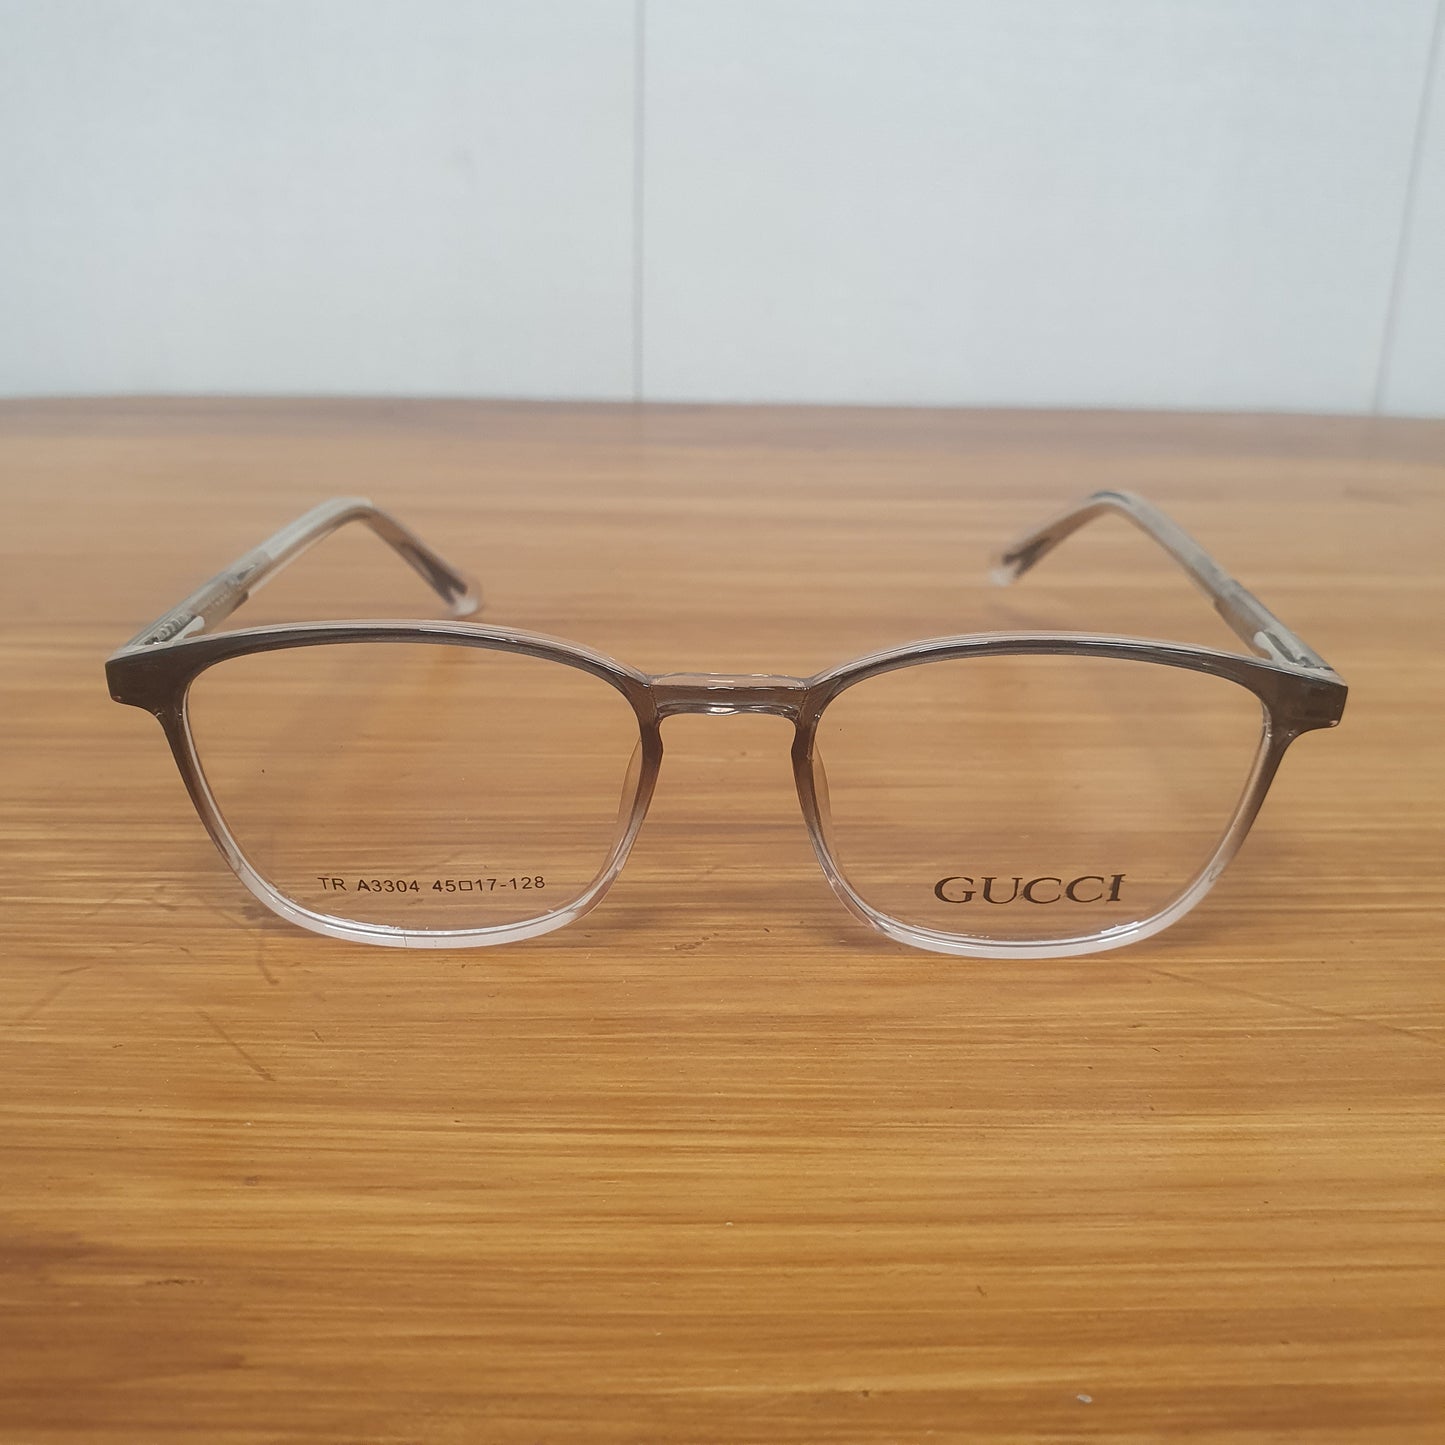 Kids GUCCI Frame Without Box